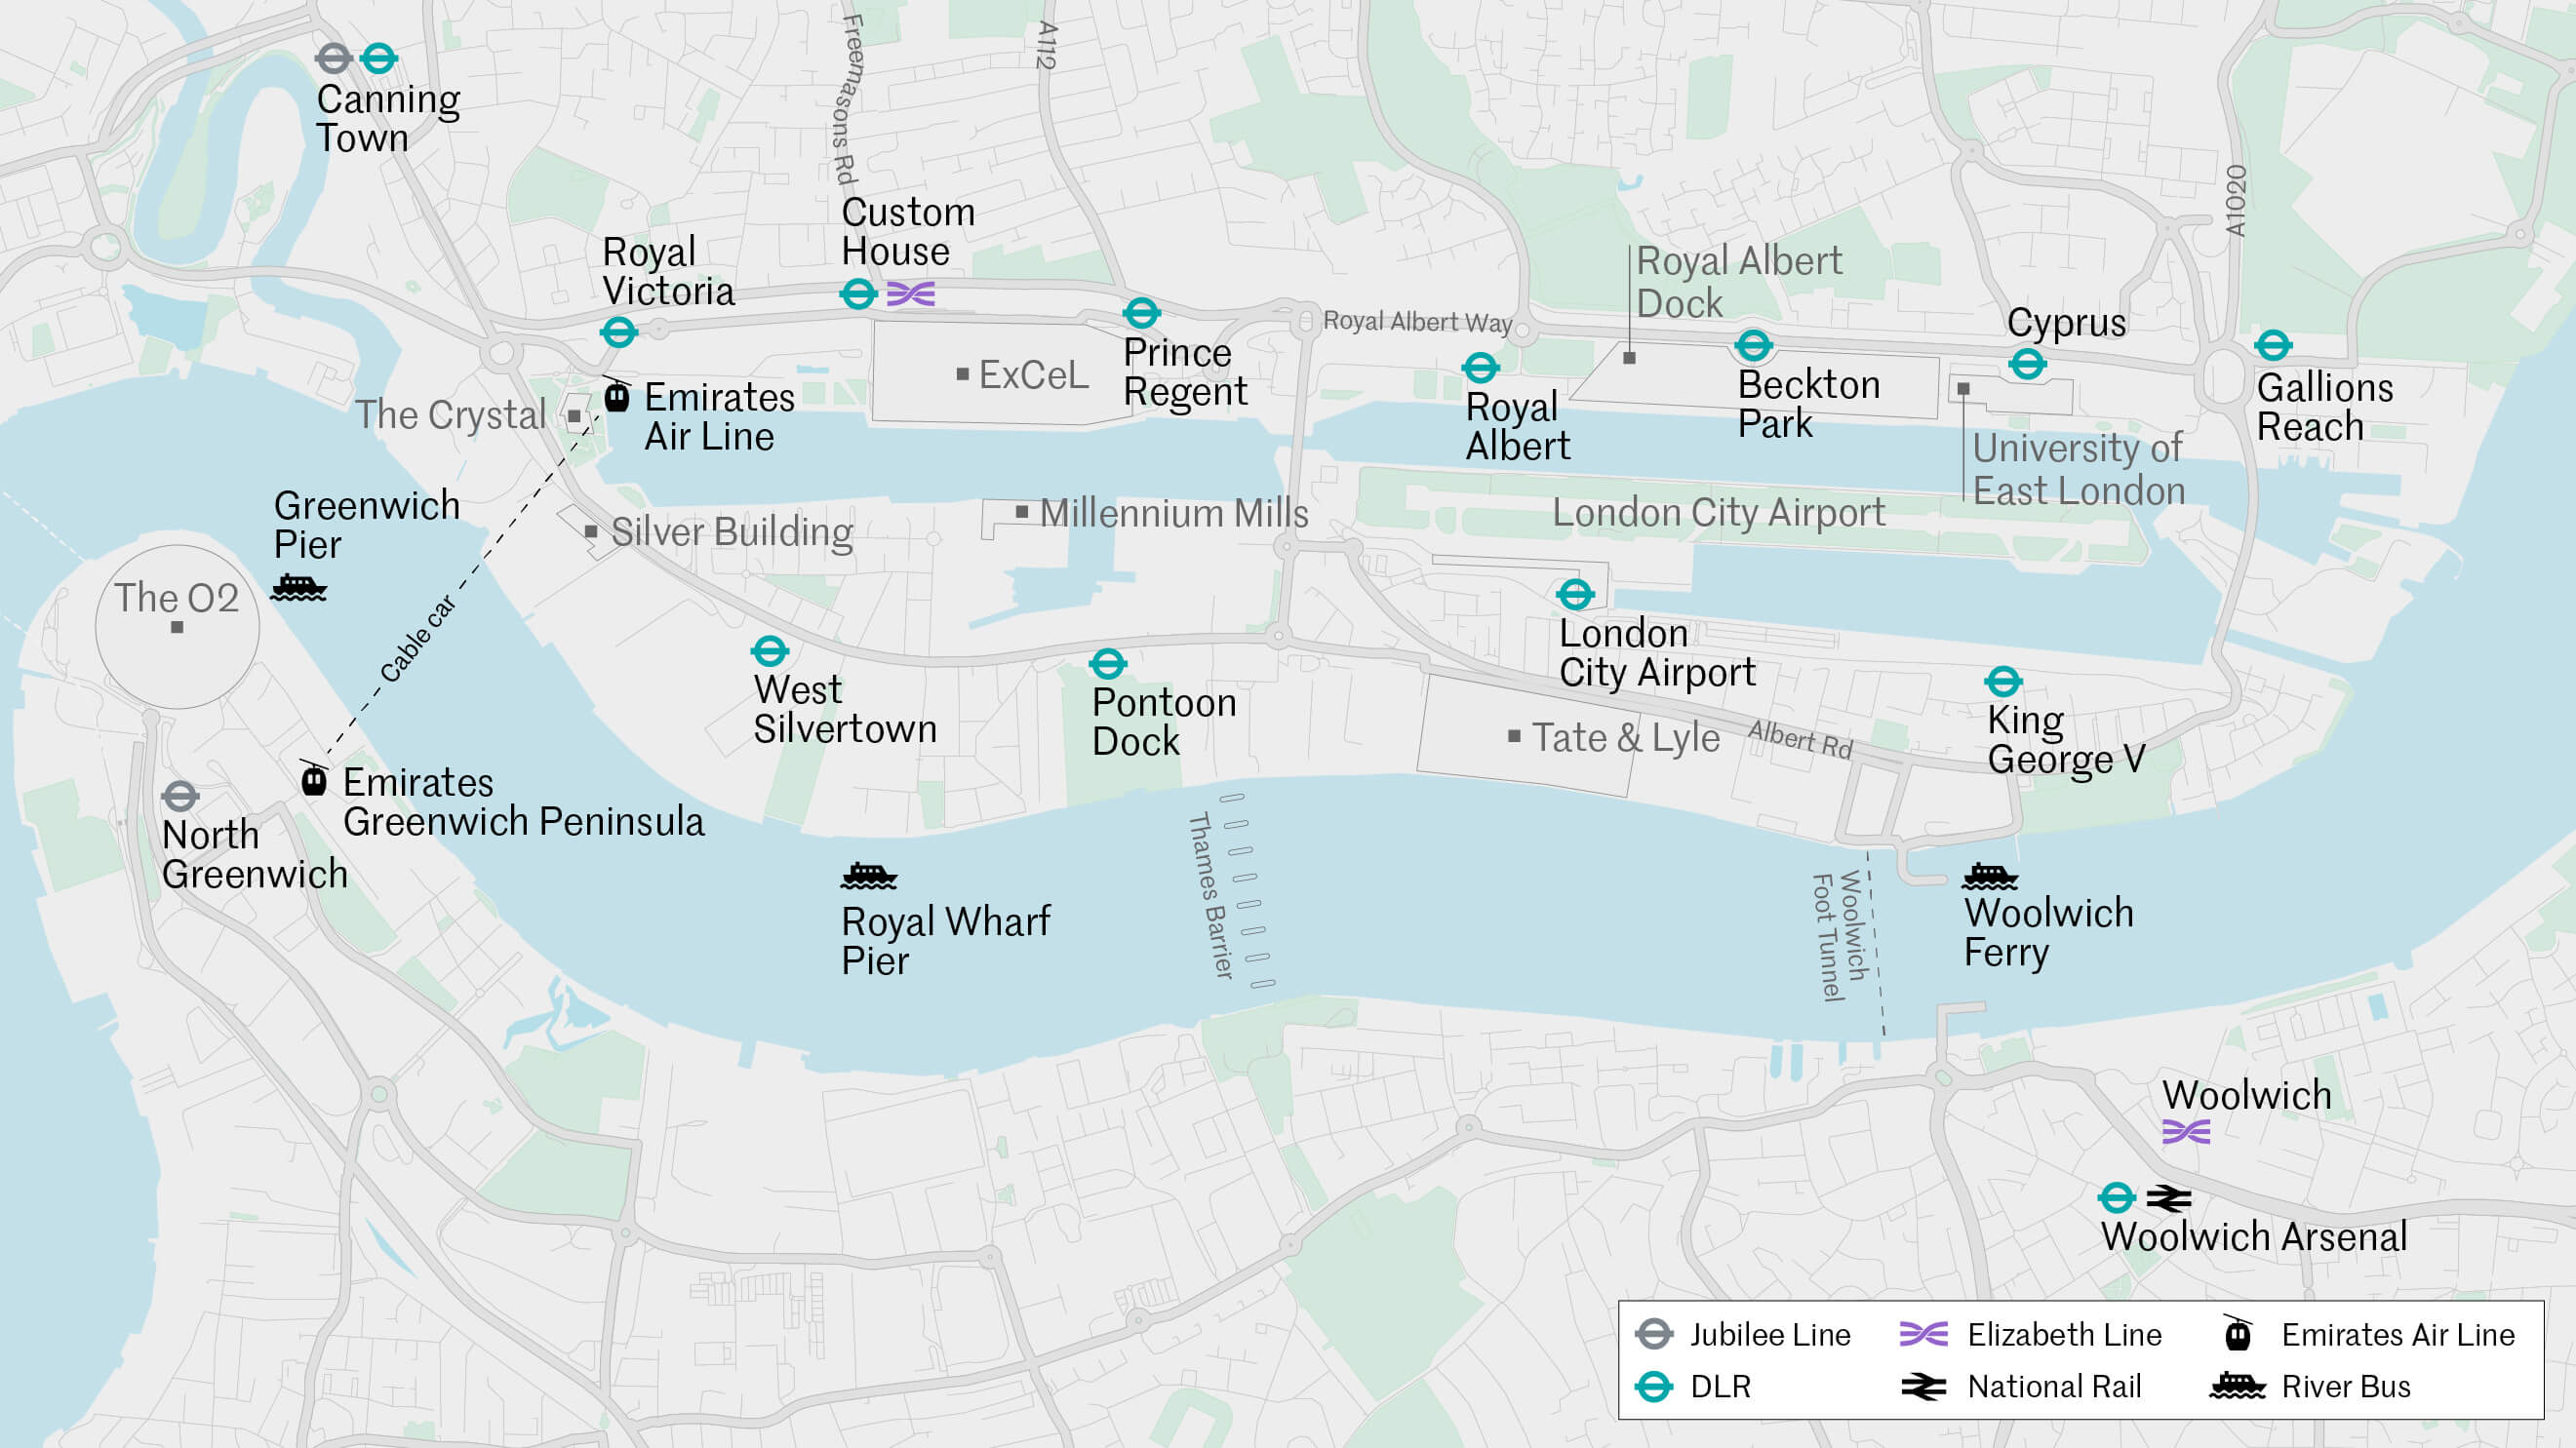 Royal Docks wide area map preview image